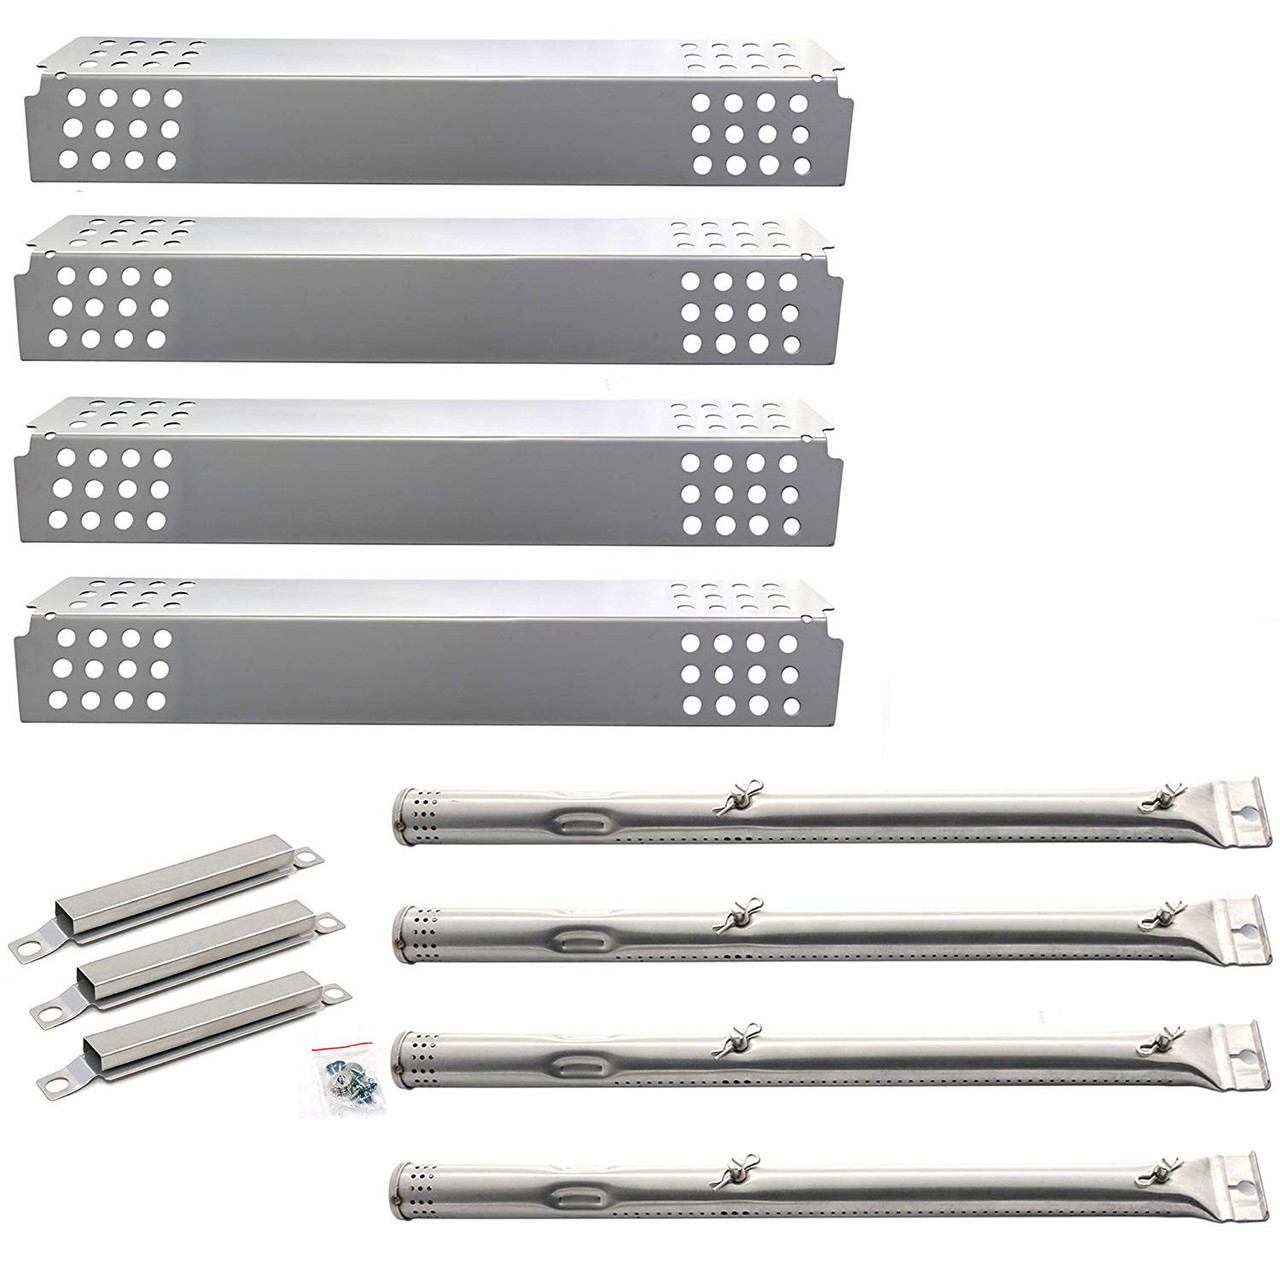 Charbroil Gas Grill Replacement Crossover Tubes and Burners,Heat Plates 